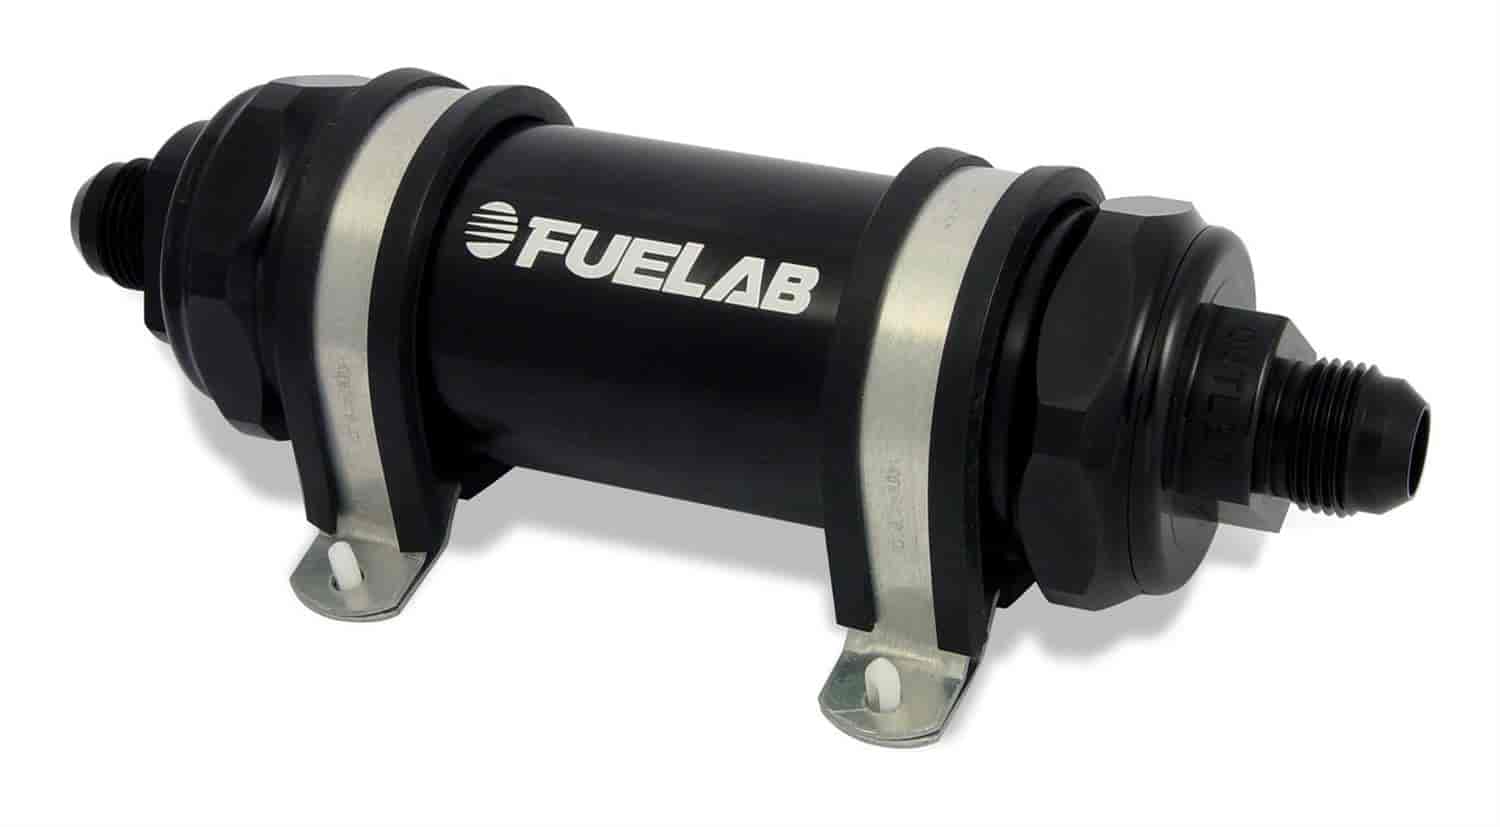 In-Line Fuel Filter Long Length -8AN Inlet/-12AN Outlet 75 micron stainless steel element